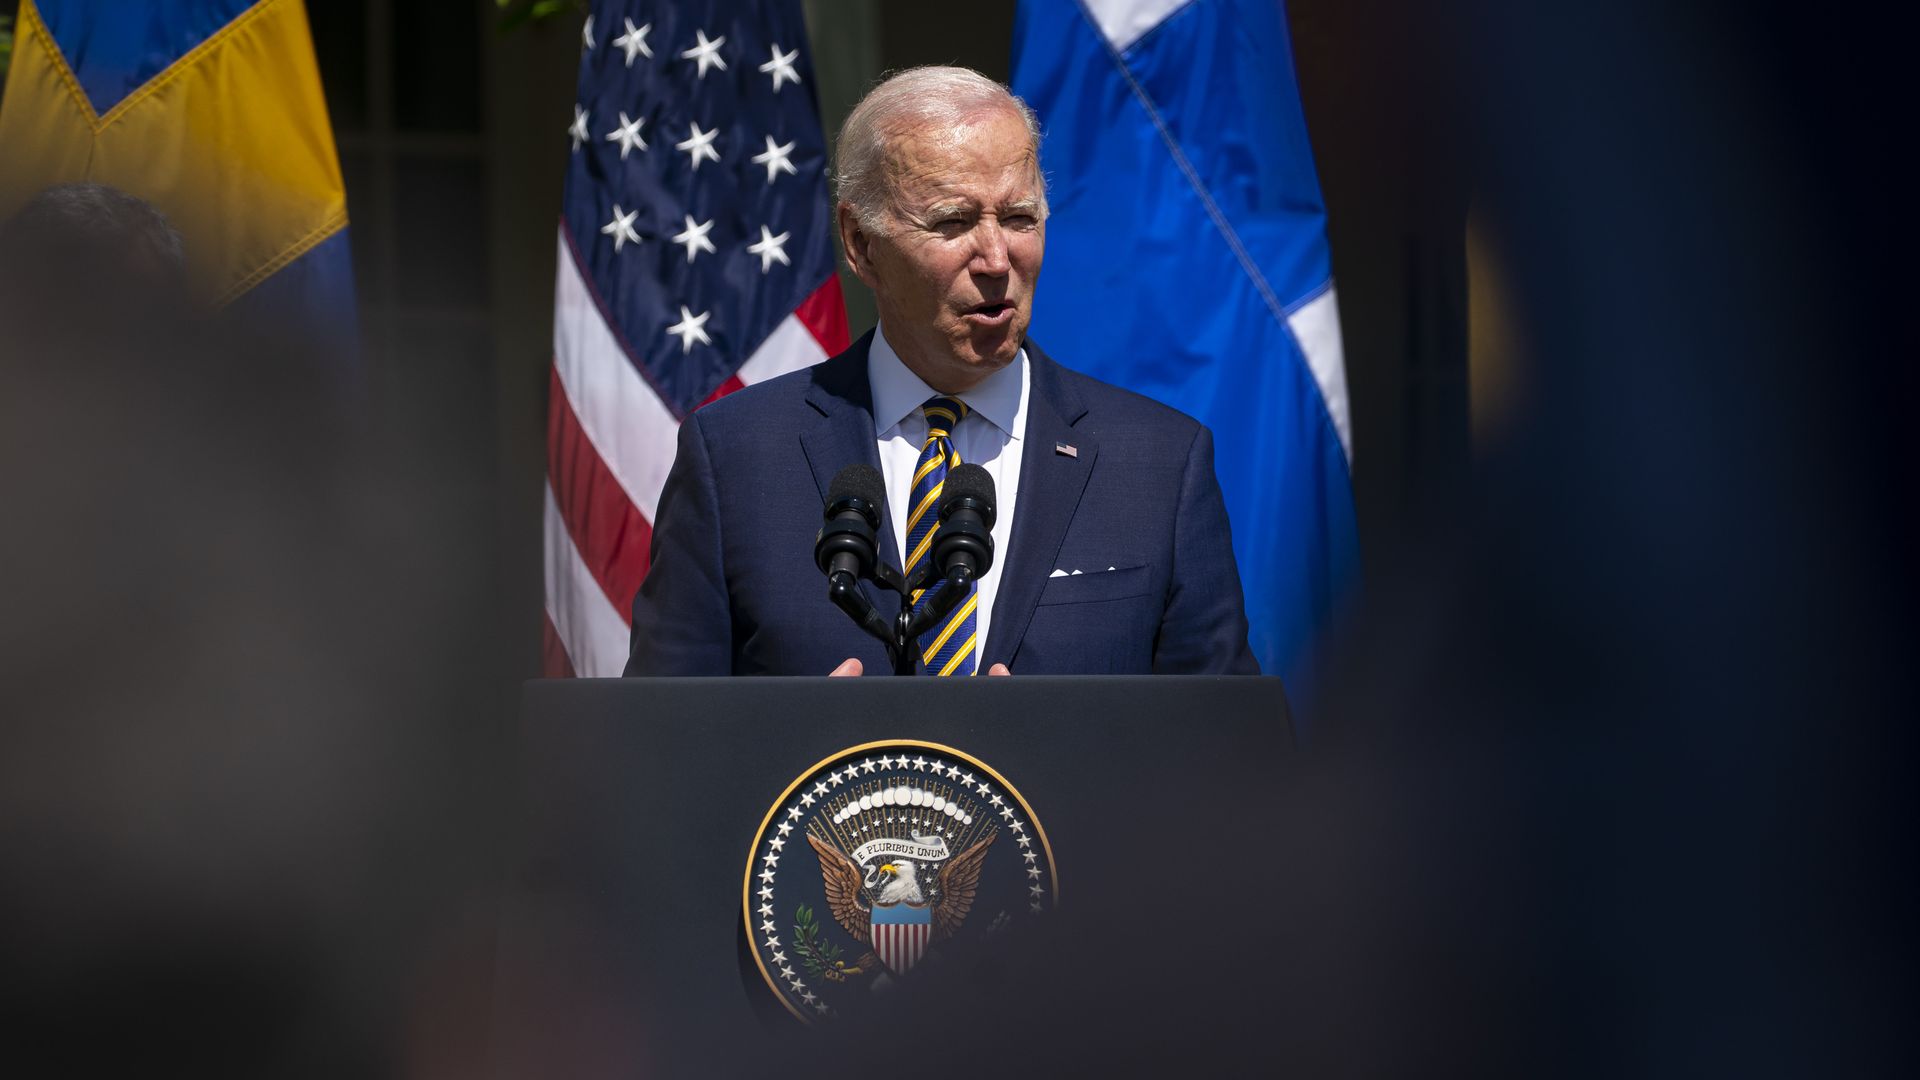 President Biden during a press conference at the White House on May 19.